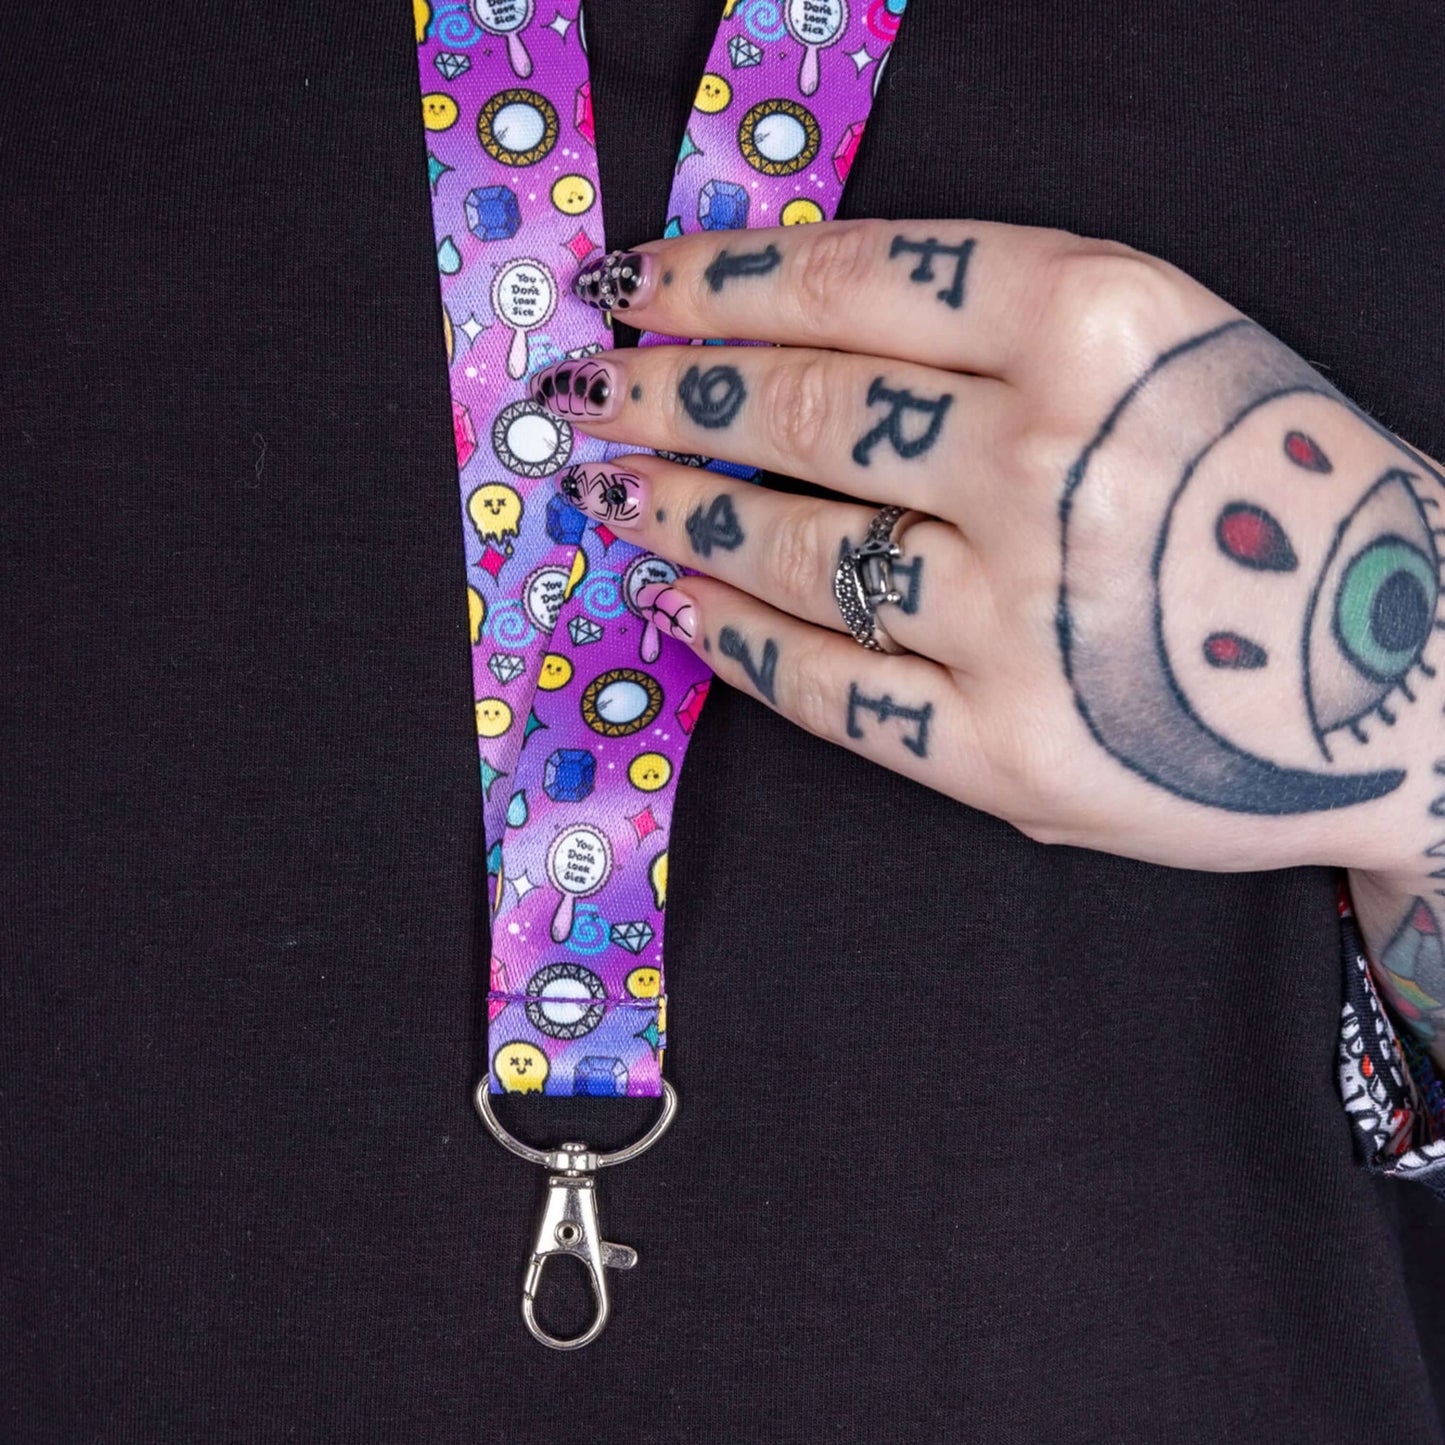 You Don't Look Sick Lanyard worn by a tattooed model with red hair. Silver clip purple lanyard features melting yellow smiley faces, mirrors, gemstones, teardrops, sparkles, swirls and dots with a centre hand held mirror reading 'you don't look sick'. The hand drawn design is raising awareness for invisible illnesses.